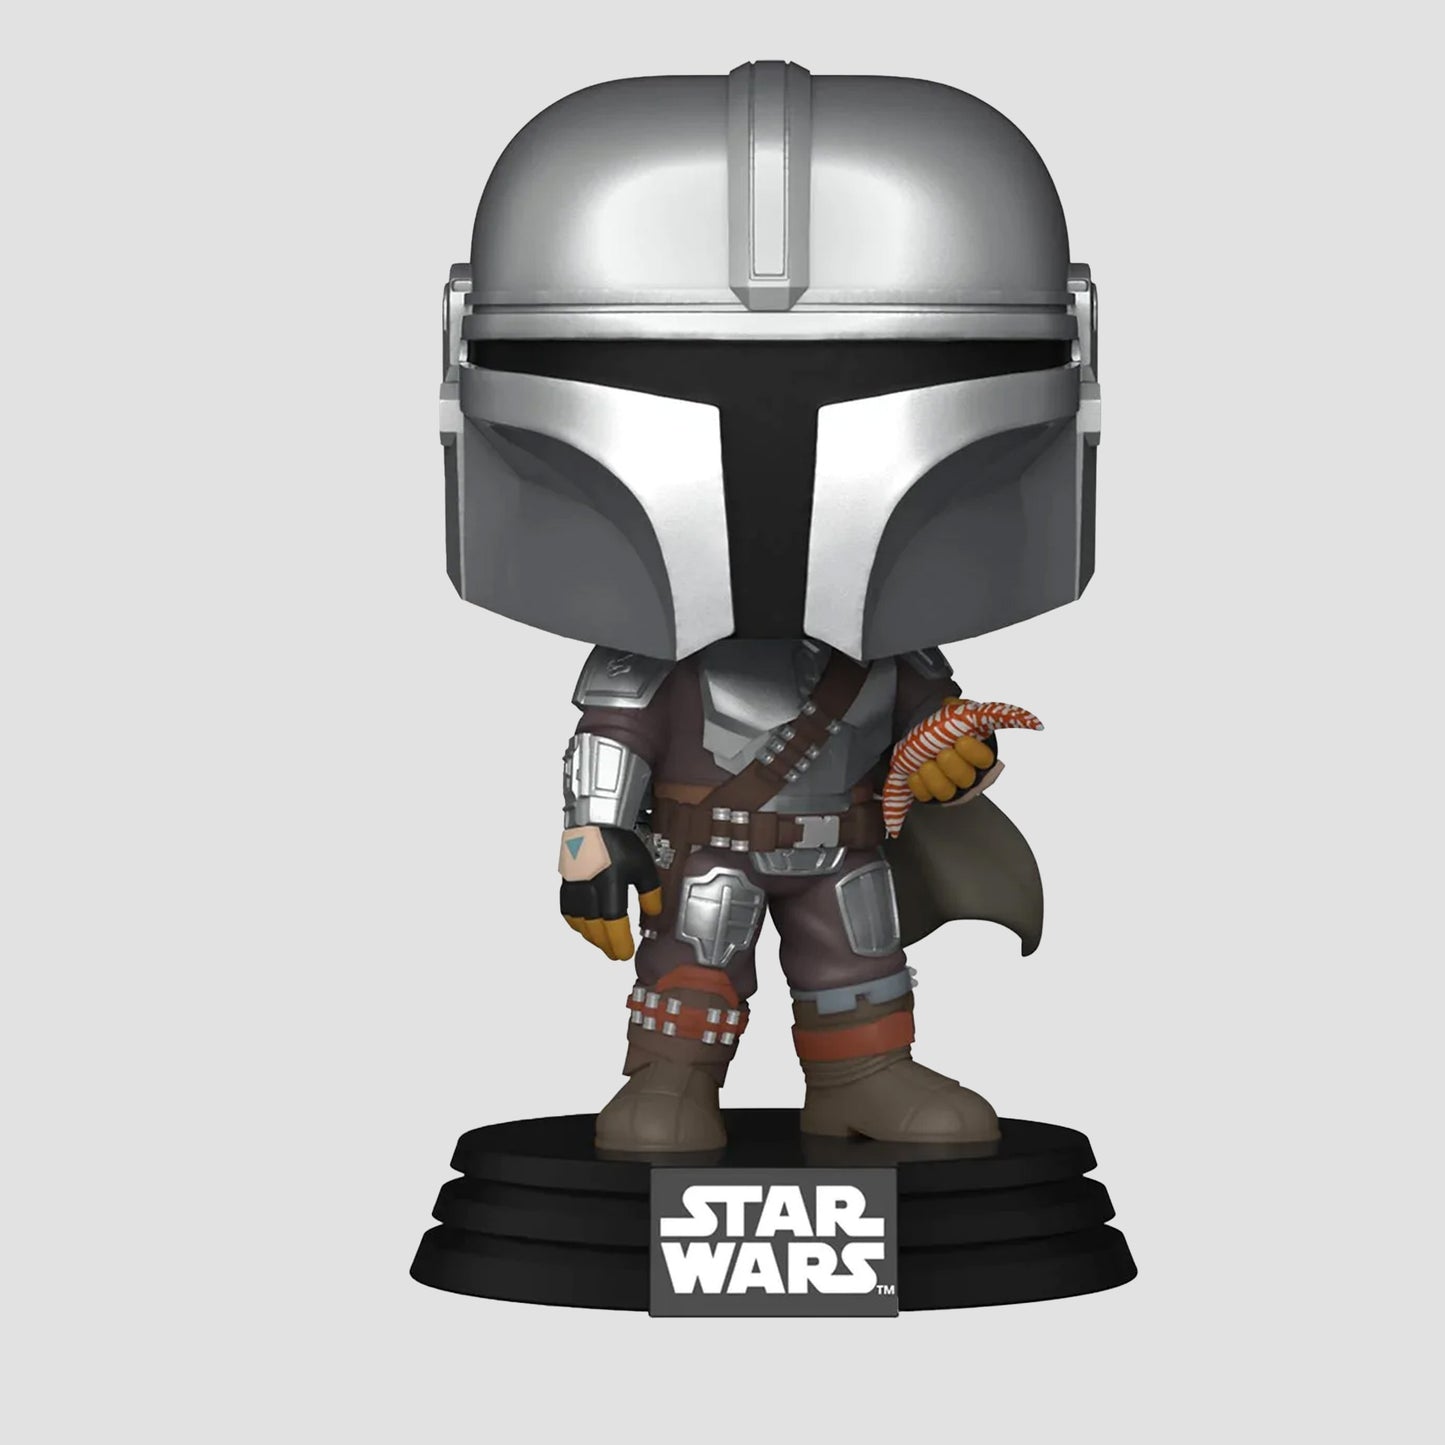 The Mandalorian with Pouch (Star Wars: The Book of Boba Fett) Funko Pop!